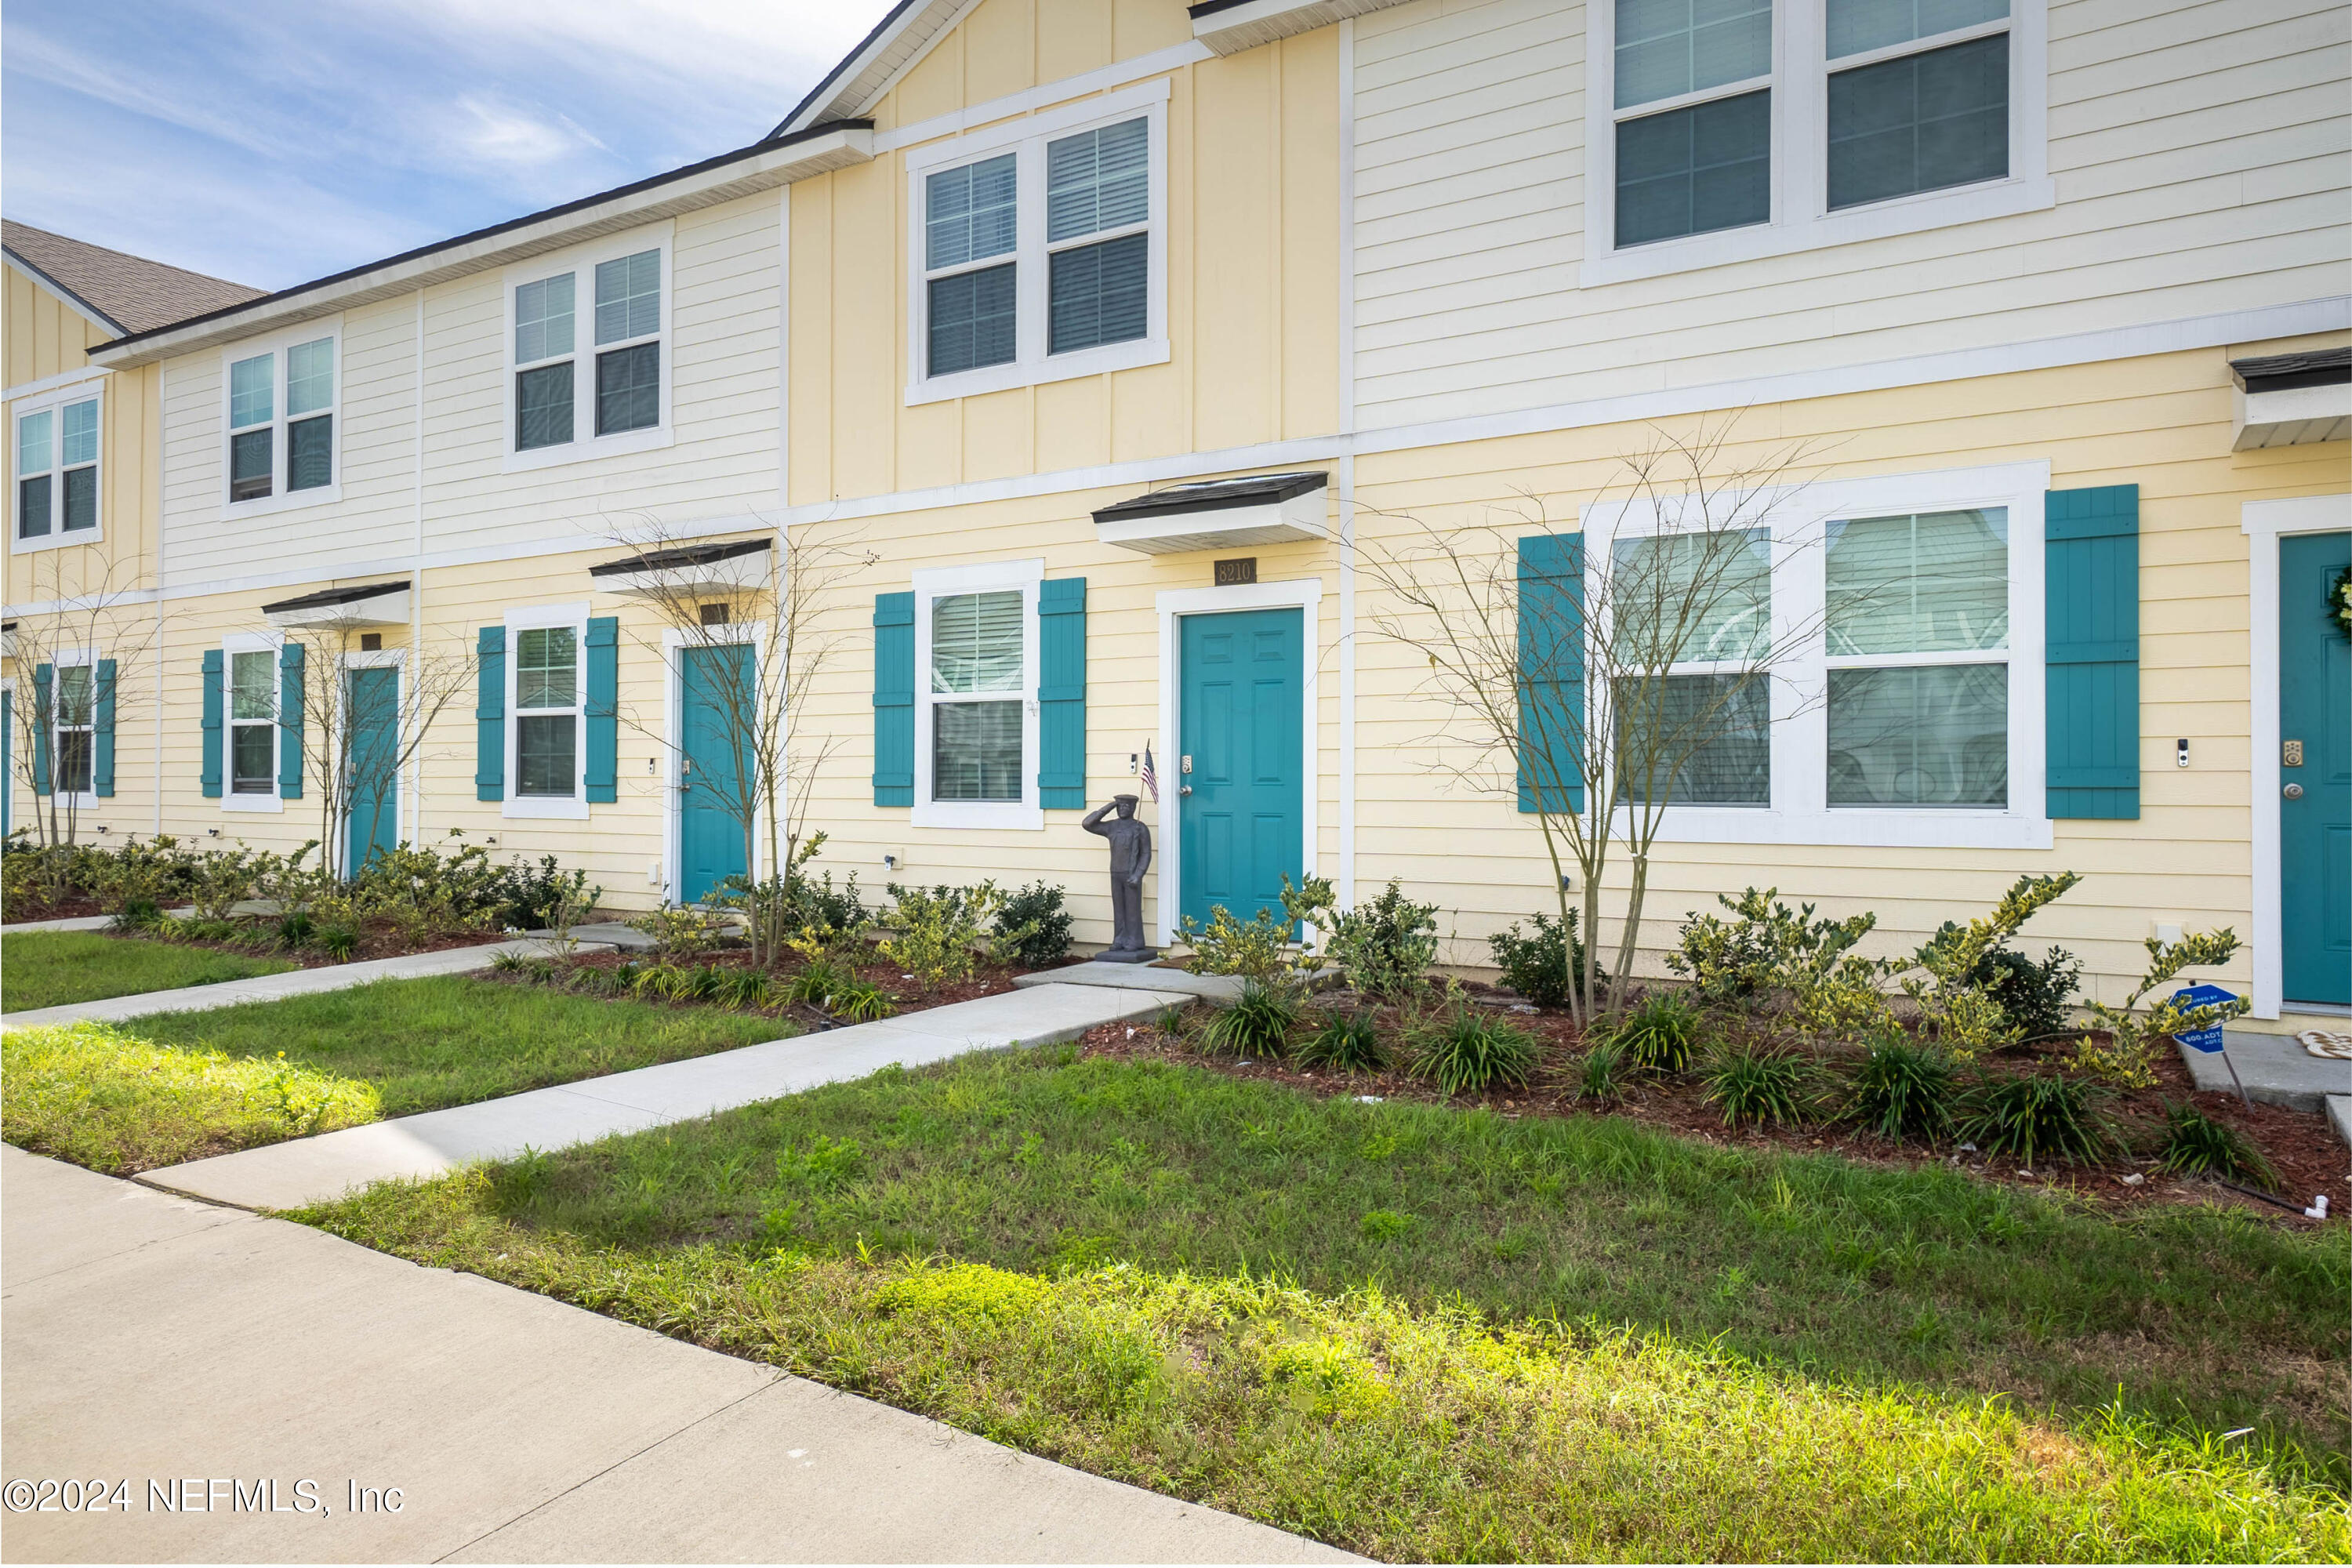 View Jacksonville, FL 32211 townhome